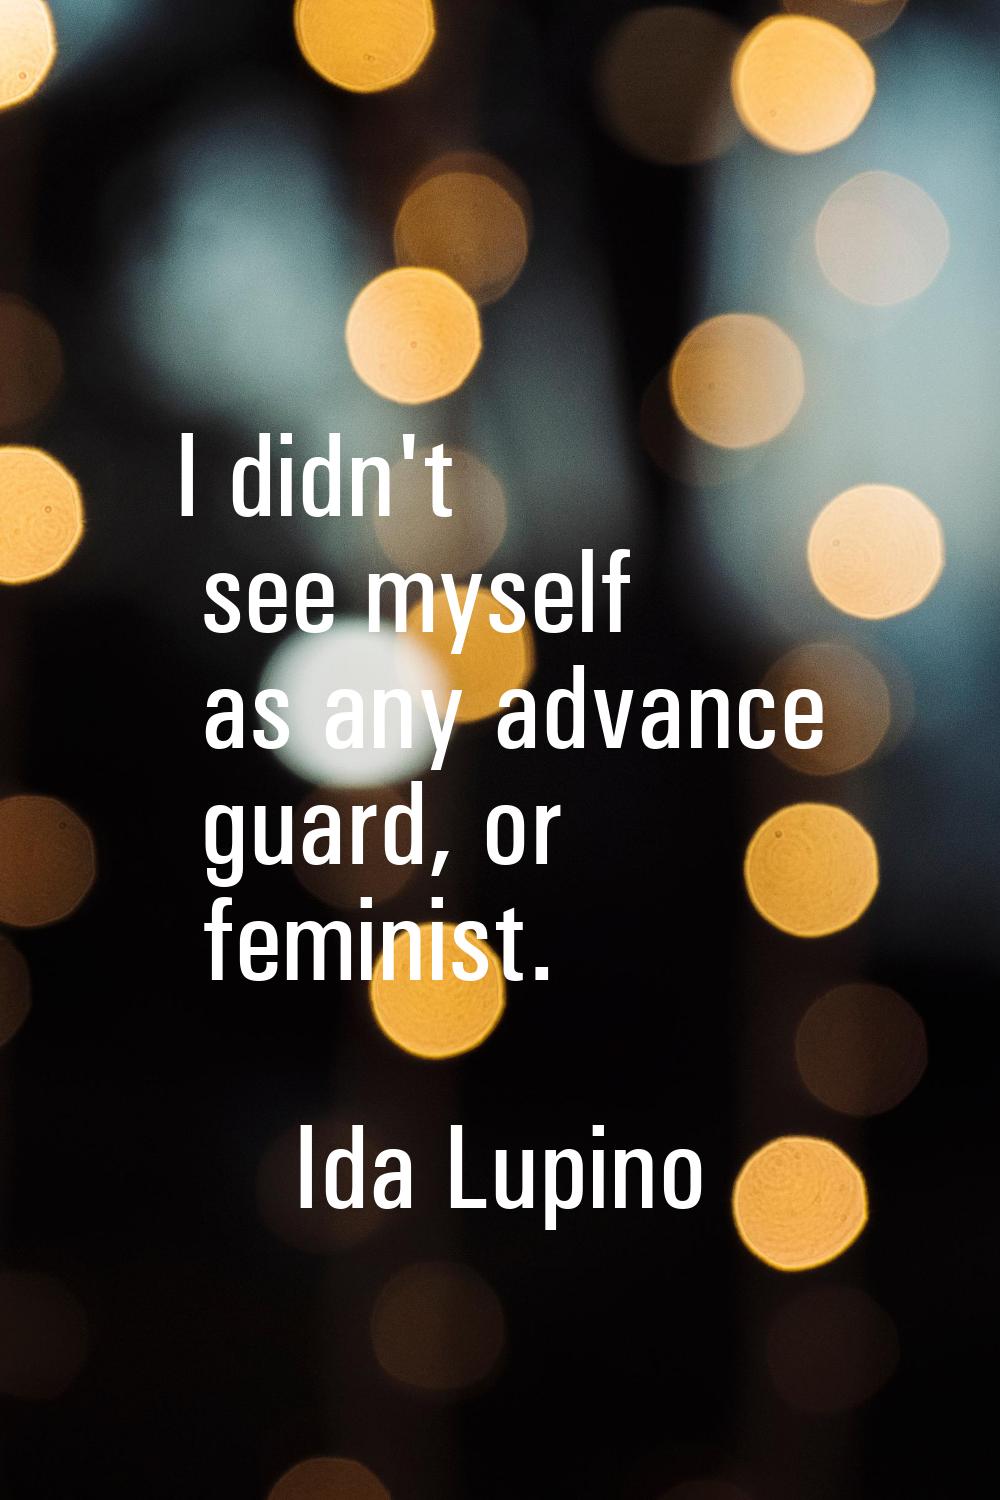 I didn't see myself as any advance guard, or feminist.